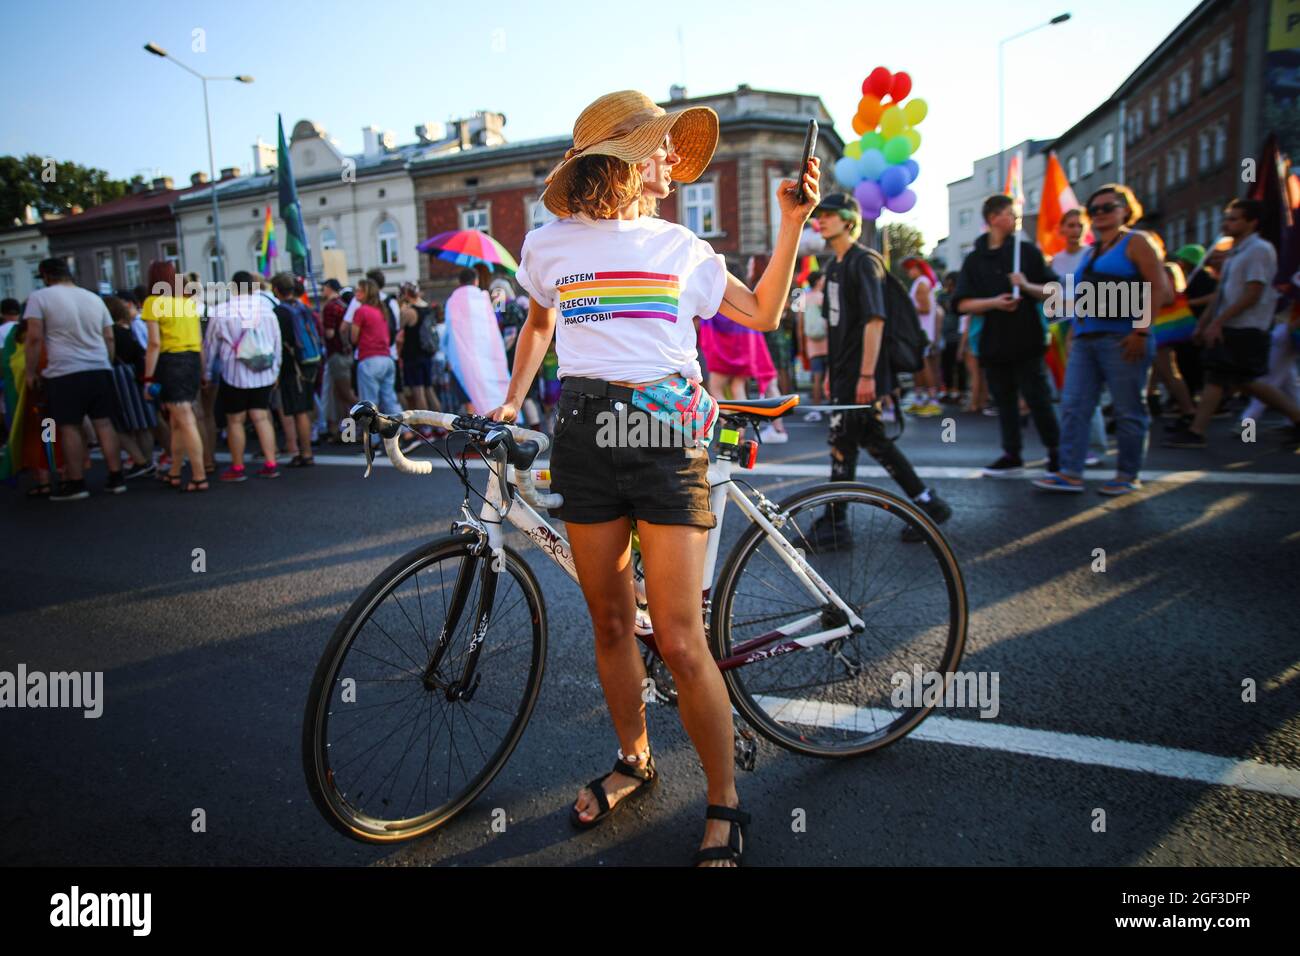 A participant is seen taking a photo with a smartphone while holding a road bike during the march.  Annual Equality March also known as 'Pride Parade' Stock Photo